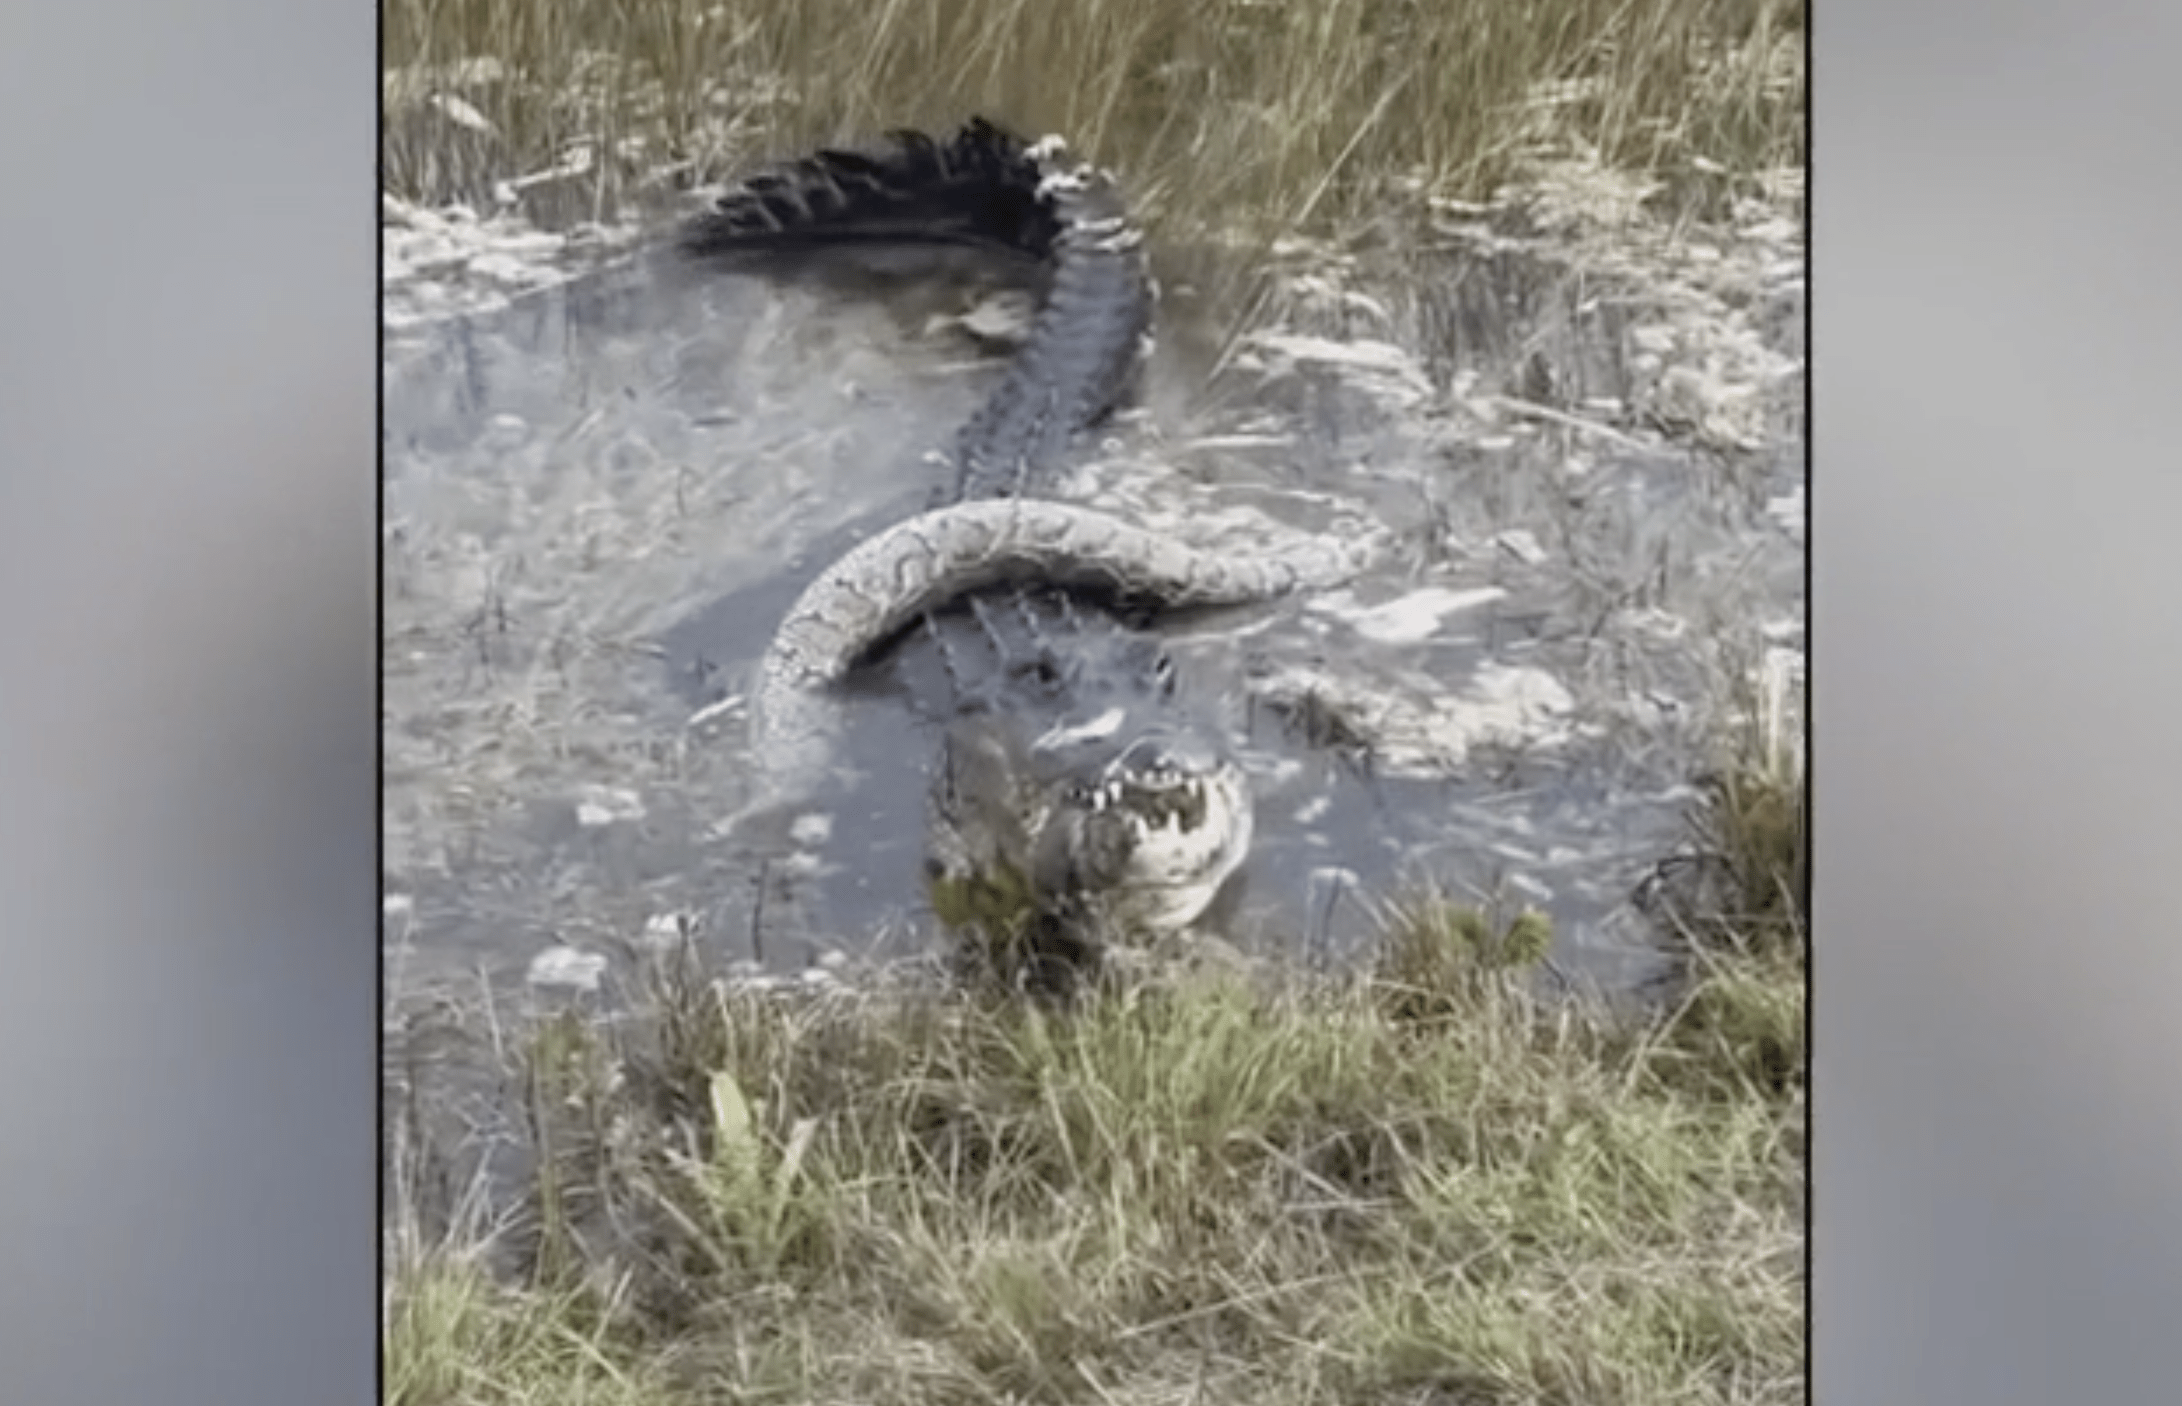 Alison Joslyn shared a video she shot from Shark Valley Trail on social media which showed a sizable gator chomping on a Burmese python, an invasive and nonnative species in Florida.